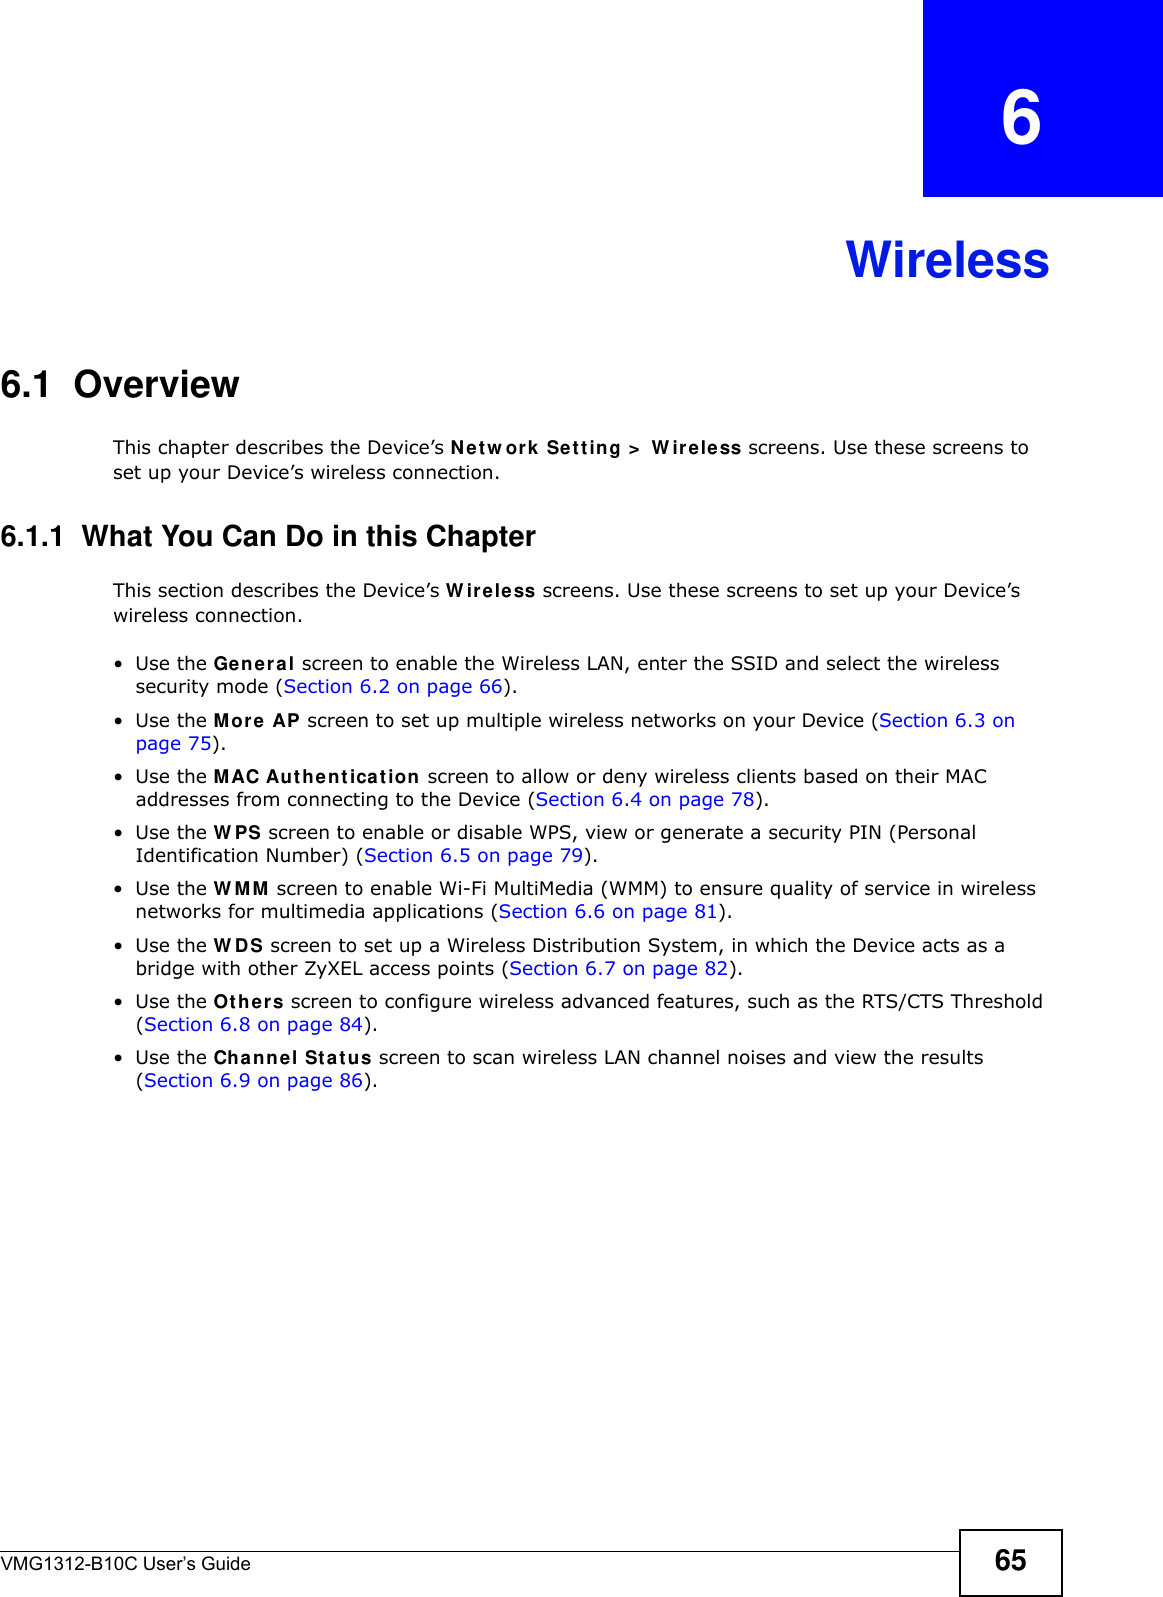 VMG1312-B10C User’s Guide 65CHAPTER   6Wireless6.1  Overview This chapter describes the Device’s Net w or k  Set t ing &gt;  W ir e le ss screens. Use these screens to set up your Device’s wireless connection.6.1.1  What You Can Do in this ChapterThis section describes the Device’s W ir e le ss screens. Use these screens to set up your Device’s wireless connection.•Use the Ge n e r a l screen to enable the Wireless LAN, enter the SSID and select the wireless security mode (Section 6.2 on page 66).•Use the More AP screen to set up multiple wireless networks on your Device (Section 6.3 on page 75).•Use the MAC Aut hent icat ion  screen to allow or deny wireless clients based on their MAC addresses from connecting to the Device (Section 6.4 on page 78).•Use the W PS screen to enable or disable WPS, view or generate a security PIN (Personal Identification Number) (Section 6.5 on page 79).•Use the W MM  screen to enable Wi-Fi MultiMedia (WMM) to ensure quality of service in wireless networks for multimedia applications (Section 6.6 on page 81). •Use the W DS screen to set up a Wireless Distribution System, in which the Device acts as a bridge with other ZyXEL access points (Section 6.7 on page 82).•Use the Ot hers screen to configure wireless advanced features, such as the RTS/CTS Threshold (Section 6.8 on page 84).•Use the Cha nnel St a t us screen to scan wireless LAN channel noises and view the results (Section 6.9 on page 86).